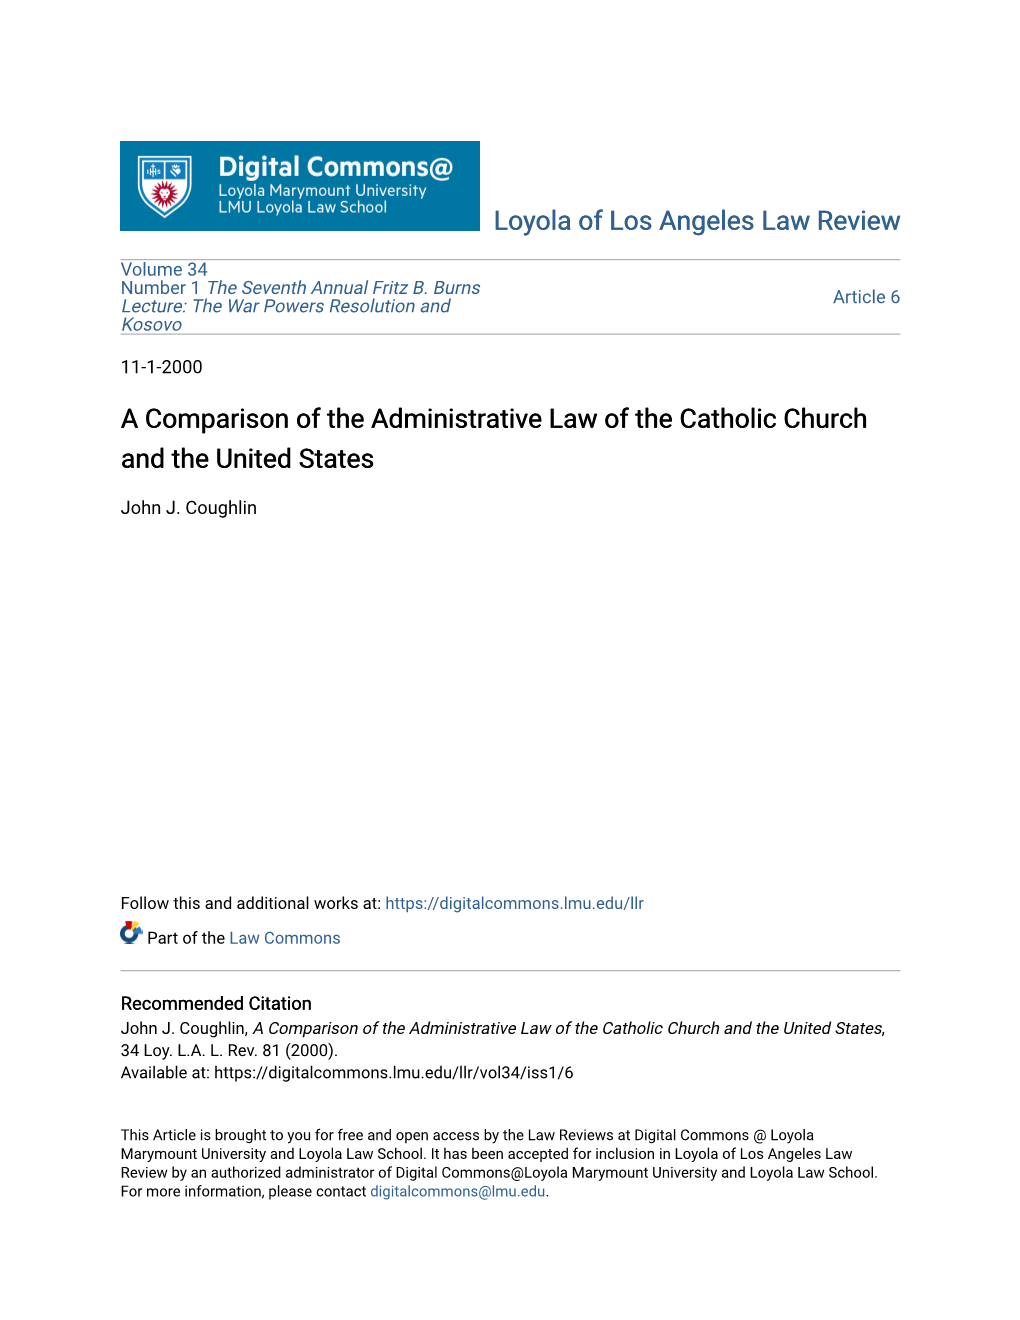 A Comparison of the Administrative Law of the Catholic Church and the United States